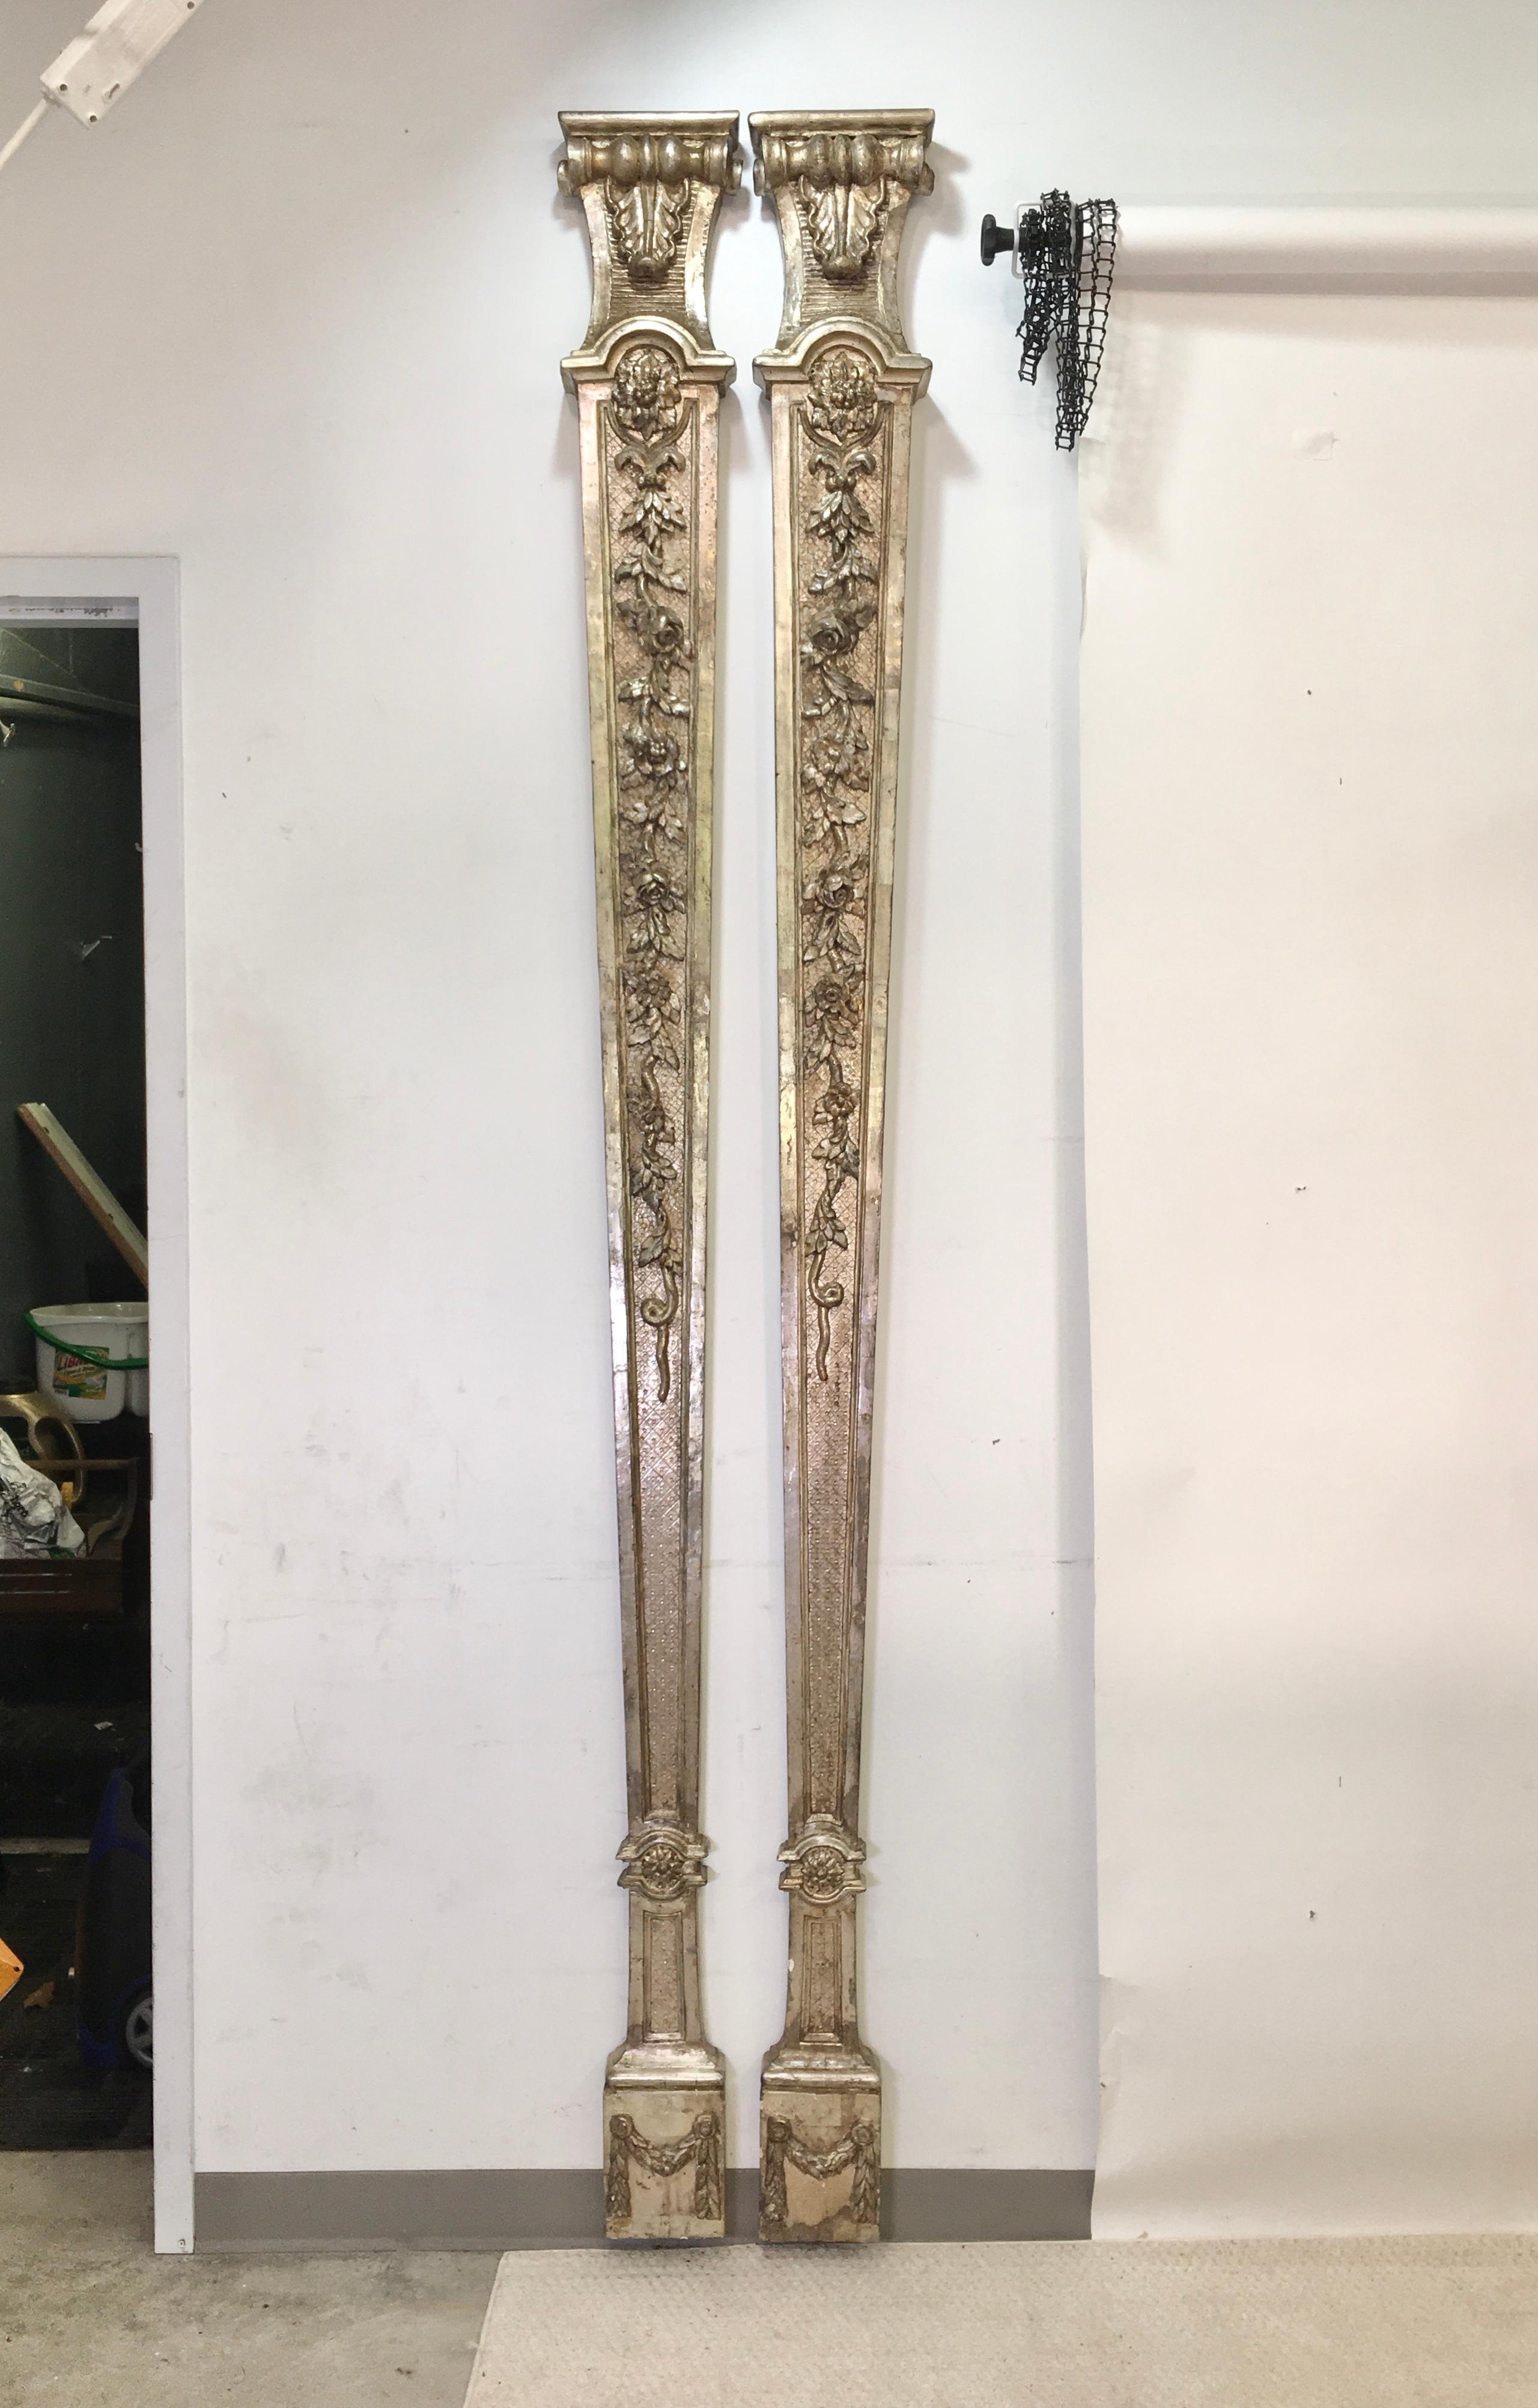 Pair of tall slender tapered pilasters, silver gilt, 8ft 8 inches tall, finely carved in the typical shallow relief manner of the Régence period. 
Gorgeous patina on silver gilding.. 
These have concentrated power to transform any room.